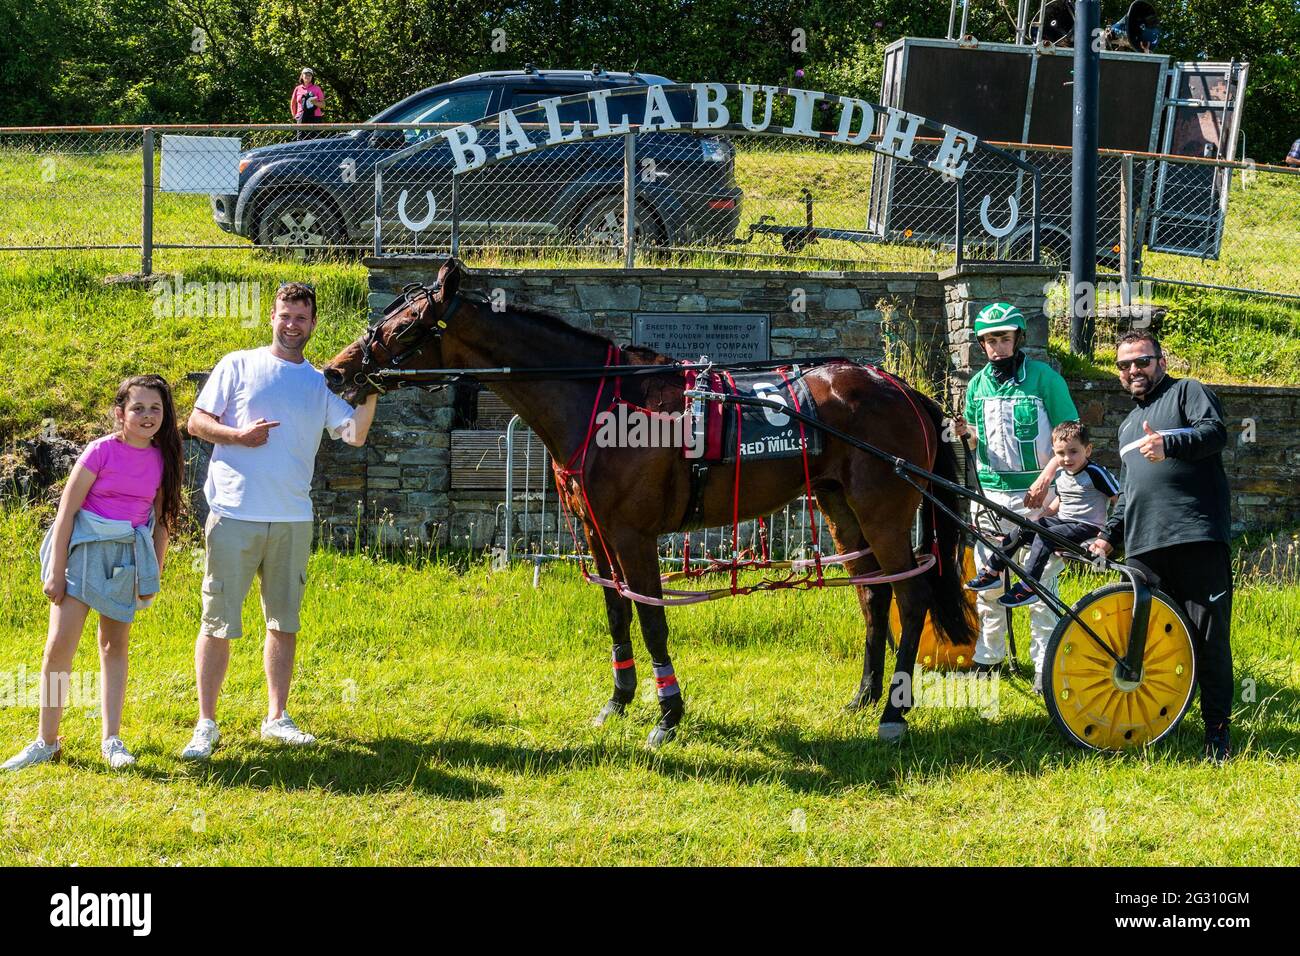 Dunmanway, West Cork, Ireland. 13th June, 2021. There was an 8 race card of sulky racing at Ballabuidhe Race Track, Dunmanway today, with spectators taking full advantage of the sunshine on the hottest day of the year so far. The winner of the 6th race was 'Llwyns Delight' owned and trained by John Manning, pictured with his son Ryan, driving, his children Abi and Callum and co-trainer Michael Shanahan. Credit: AG News/Alamy Live News Stock Photo